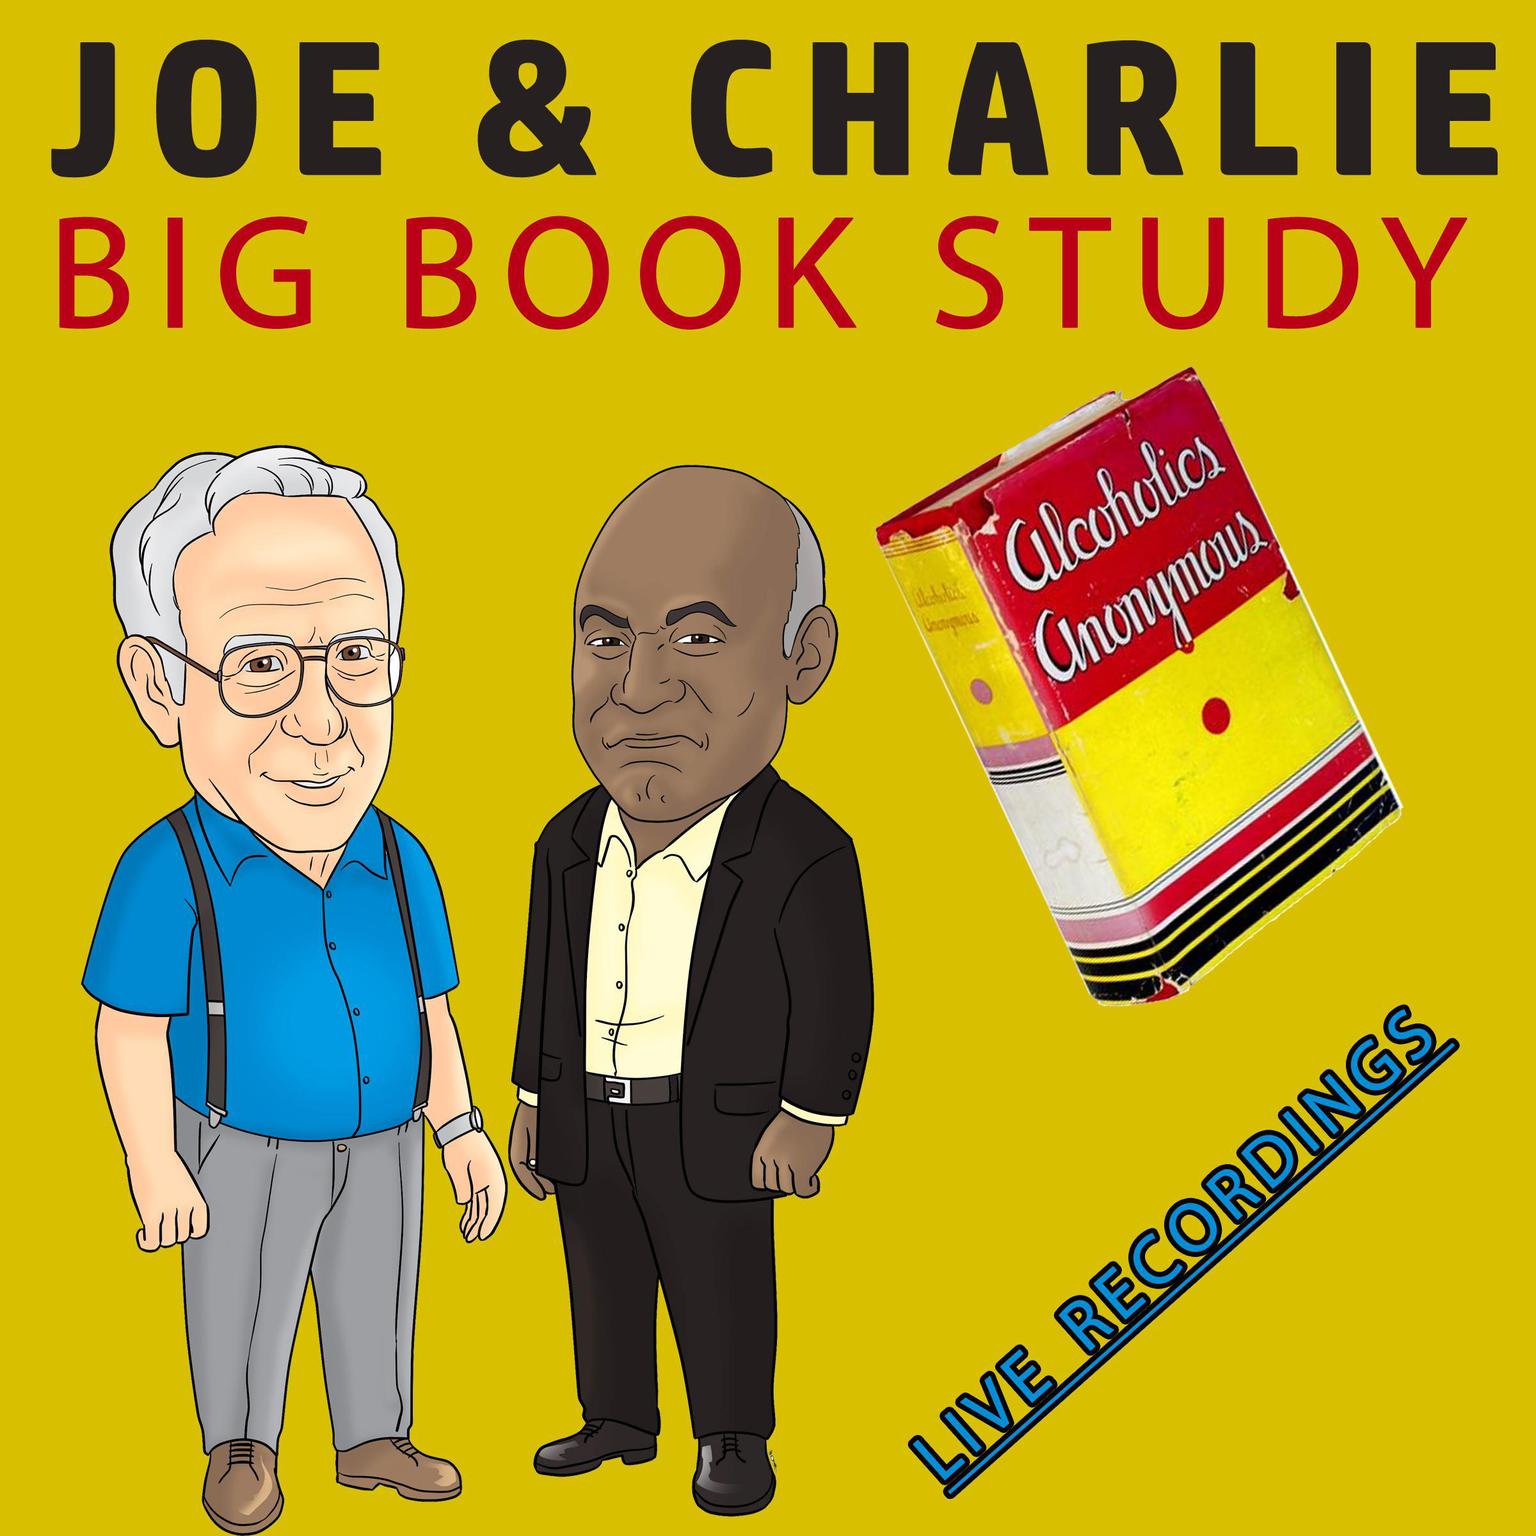 Joe & Charlie - Big Book Study - Live Recordings Audiobook, by Anonymous